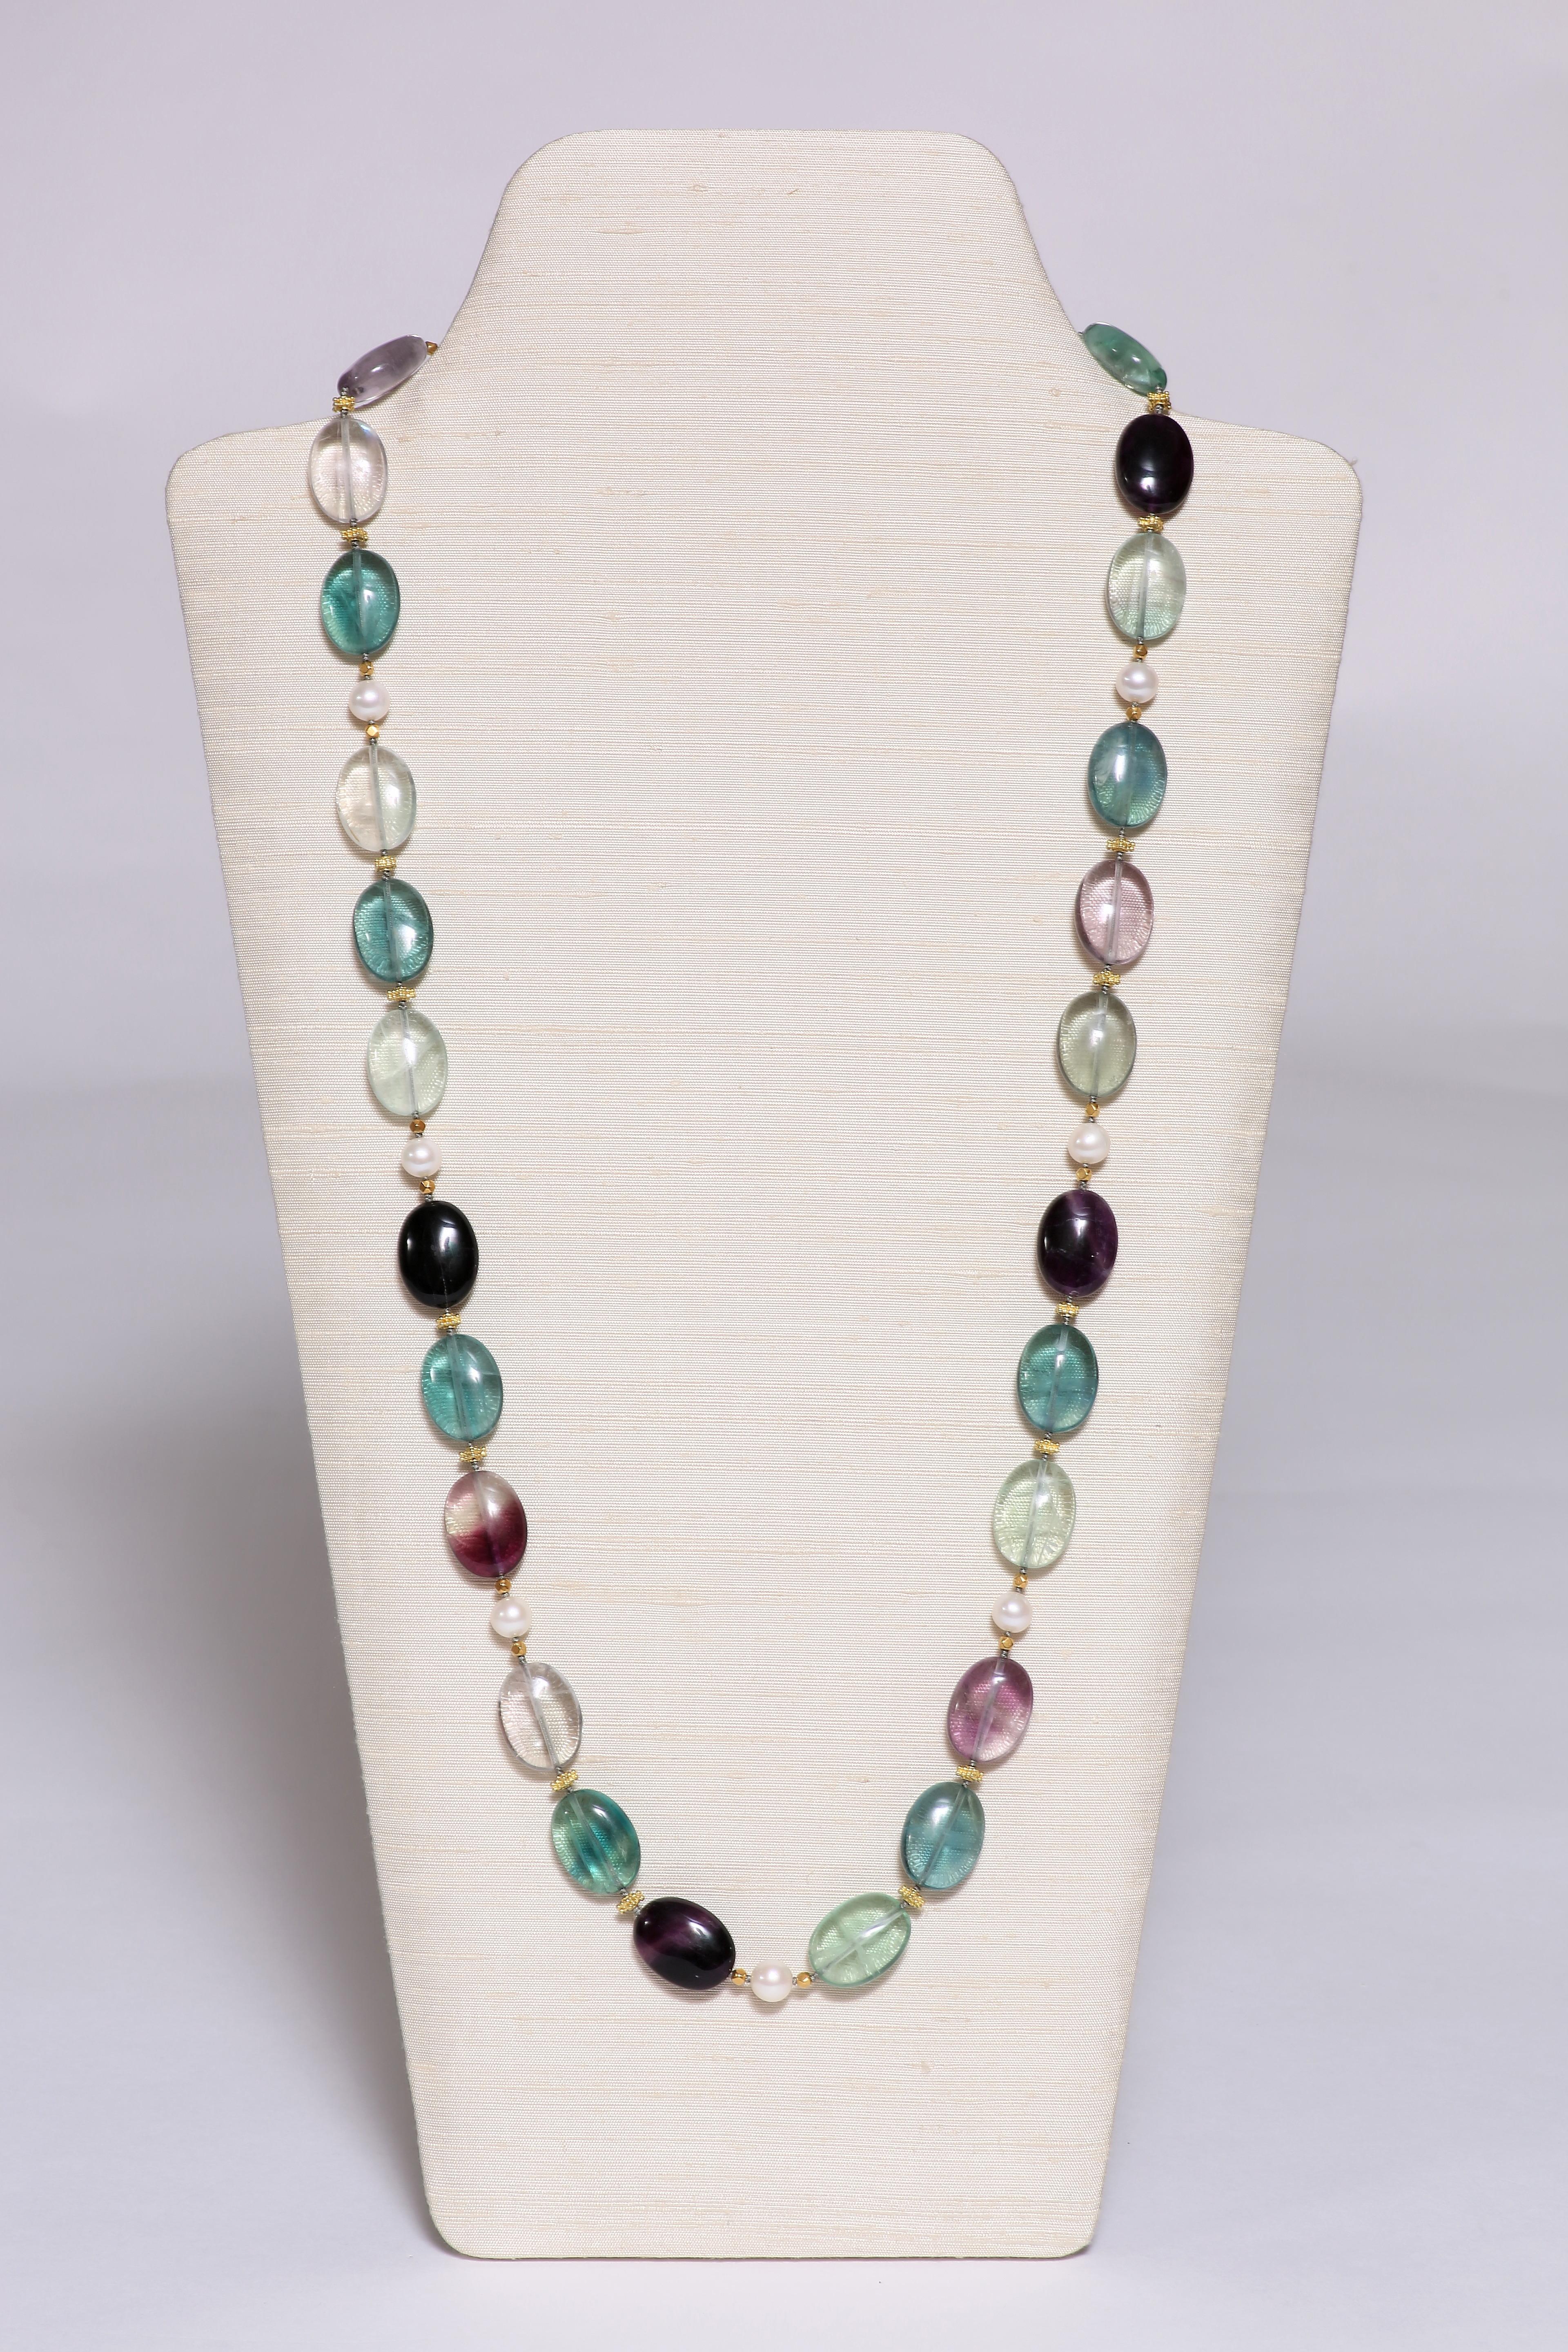 Perfect for summer. The oval-shaped fluorite beads of crystal clear color, light green, lilac and purple, spaced by freshwater pearls and 18k faceted gold beads.